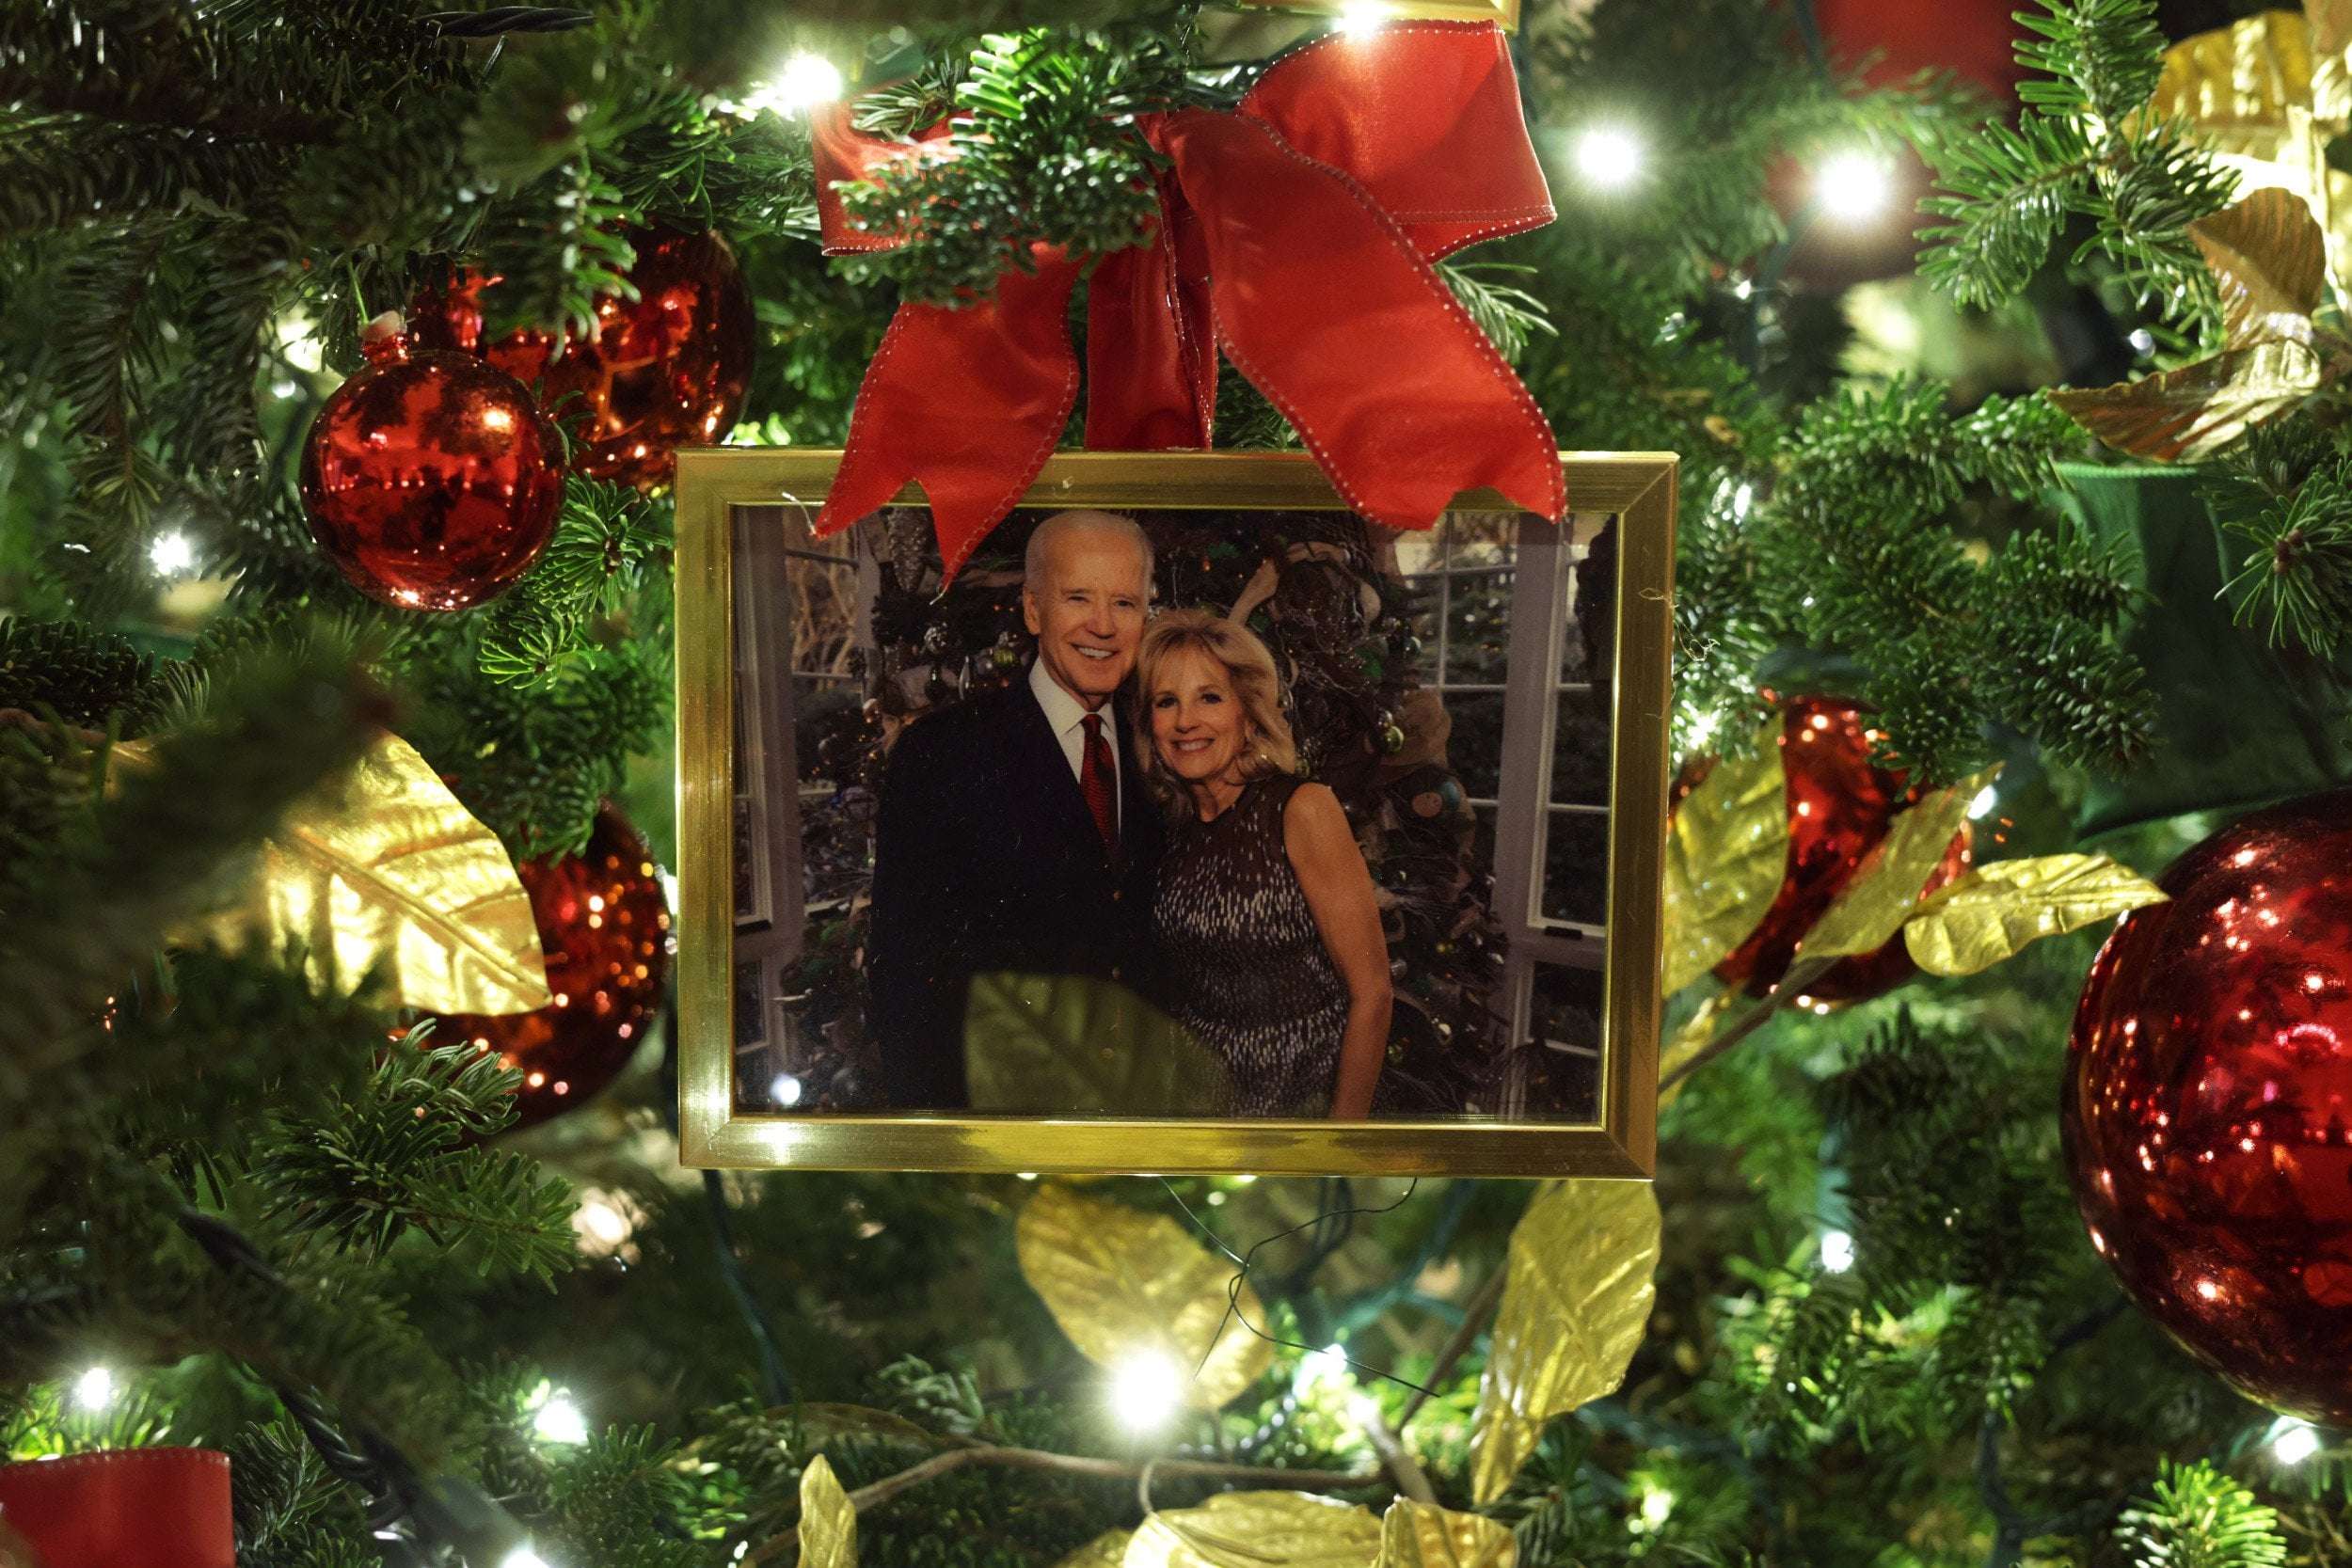 image for GOP Hopeful Blasted for Post Showing Tree Ornaments of Democrats in Nooses